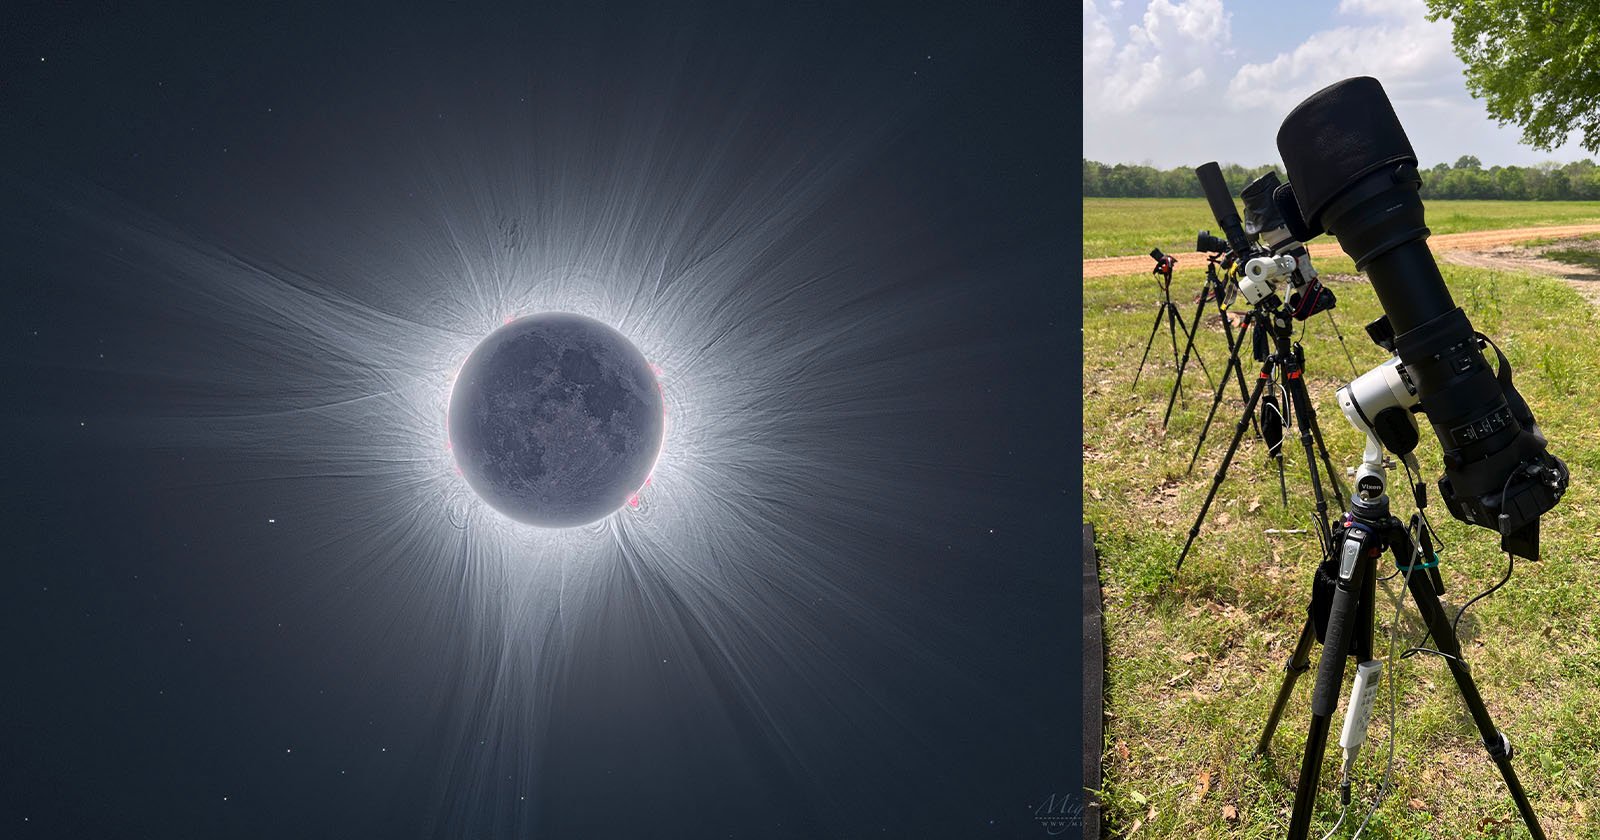 A composite image showing a total solar eclipse on the left and four telescopes set up on a grassy field on the right. The eclipse captures the solar corona surrounding the moon. The telescopes and cameras are pointed towards the sky under a partly cloudy day.